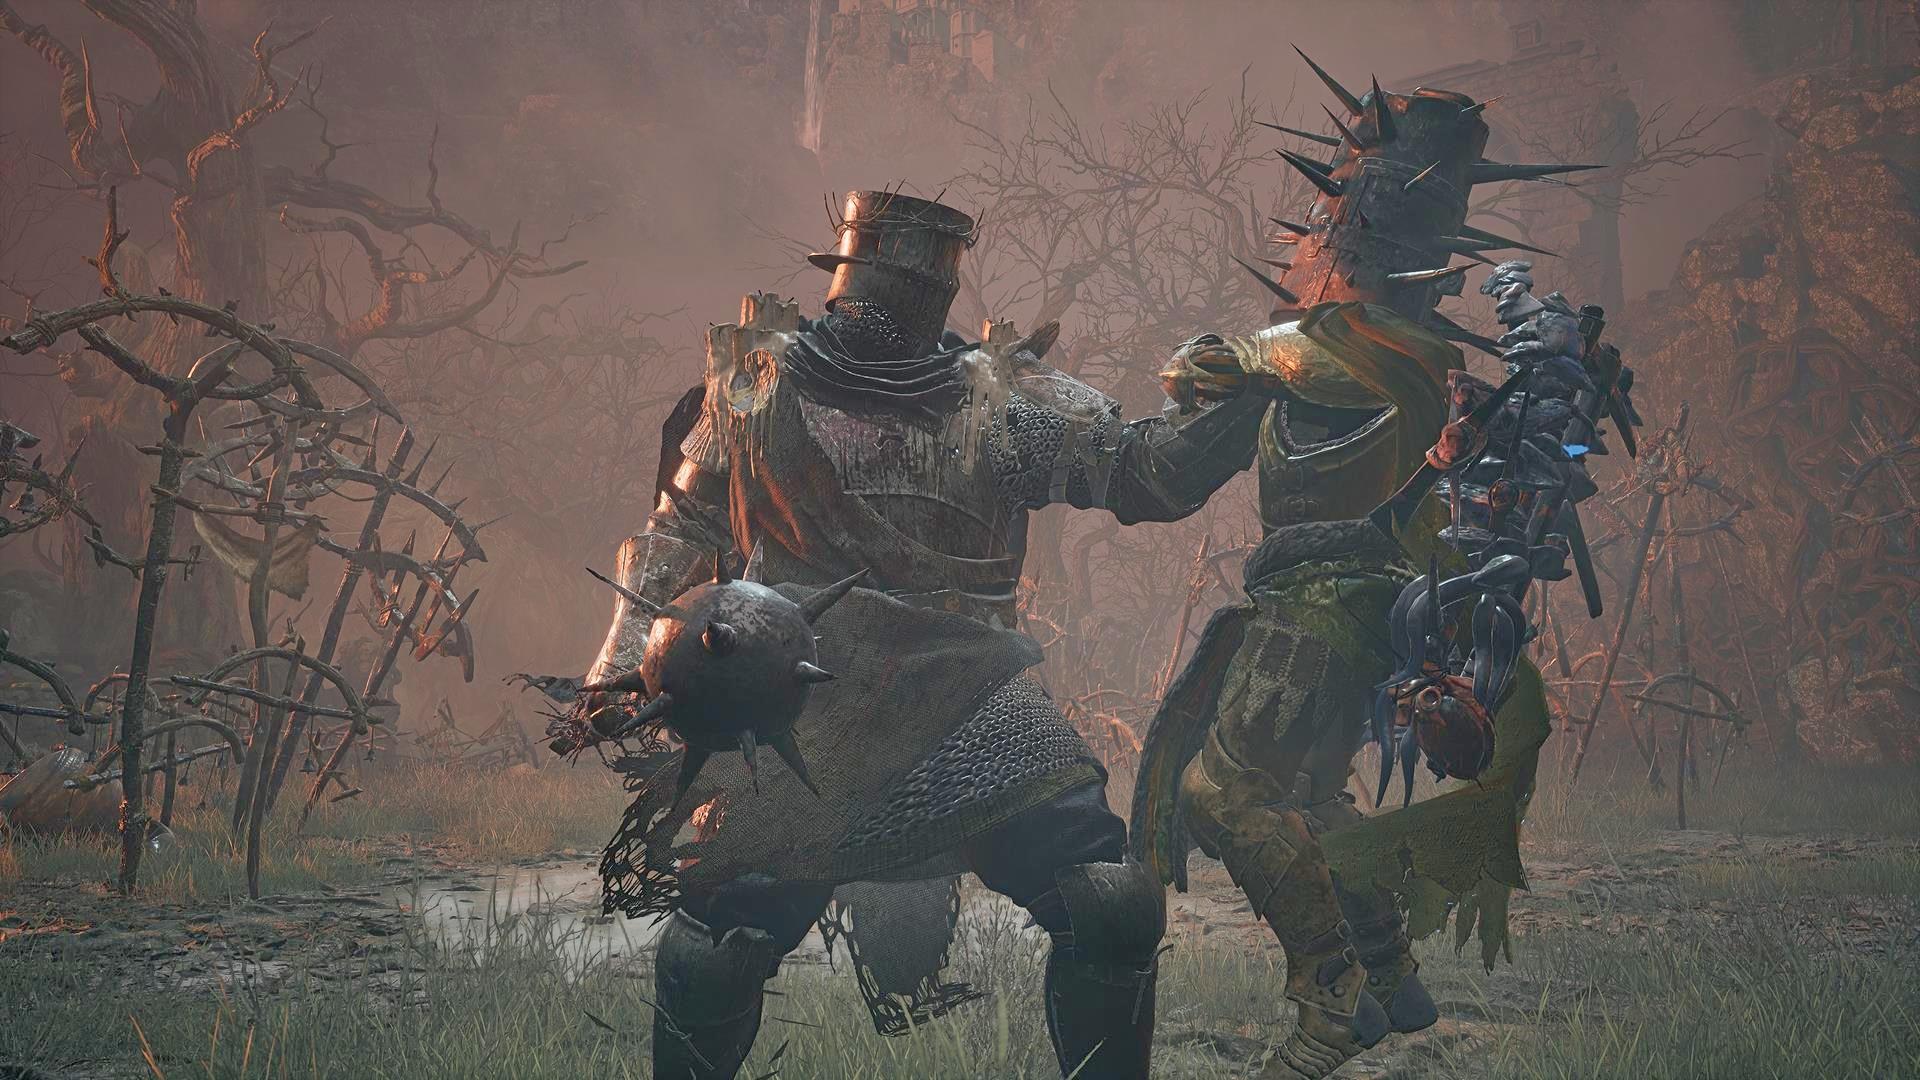 Side Quests - Lords of the Fallen Guide - IGN